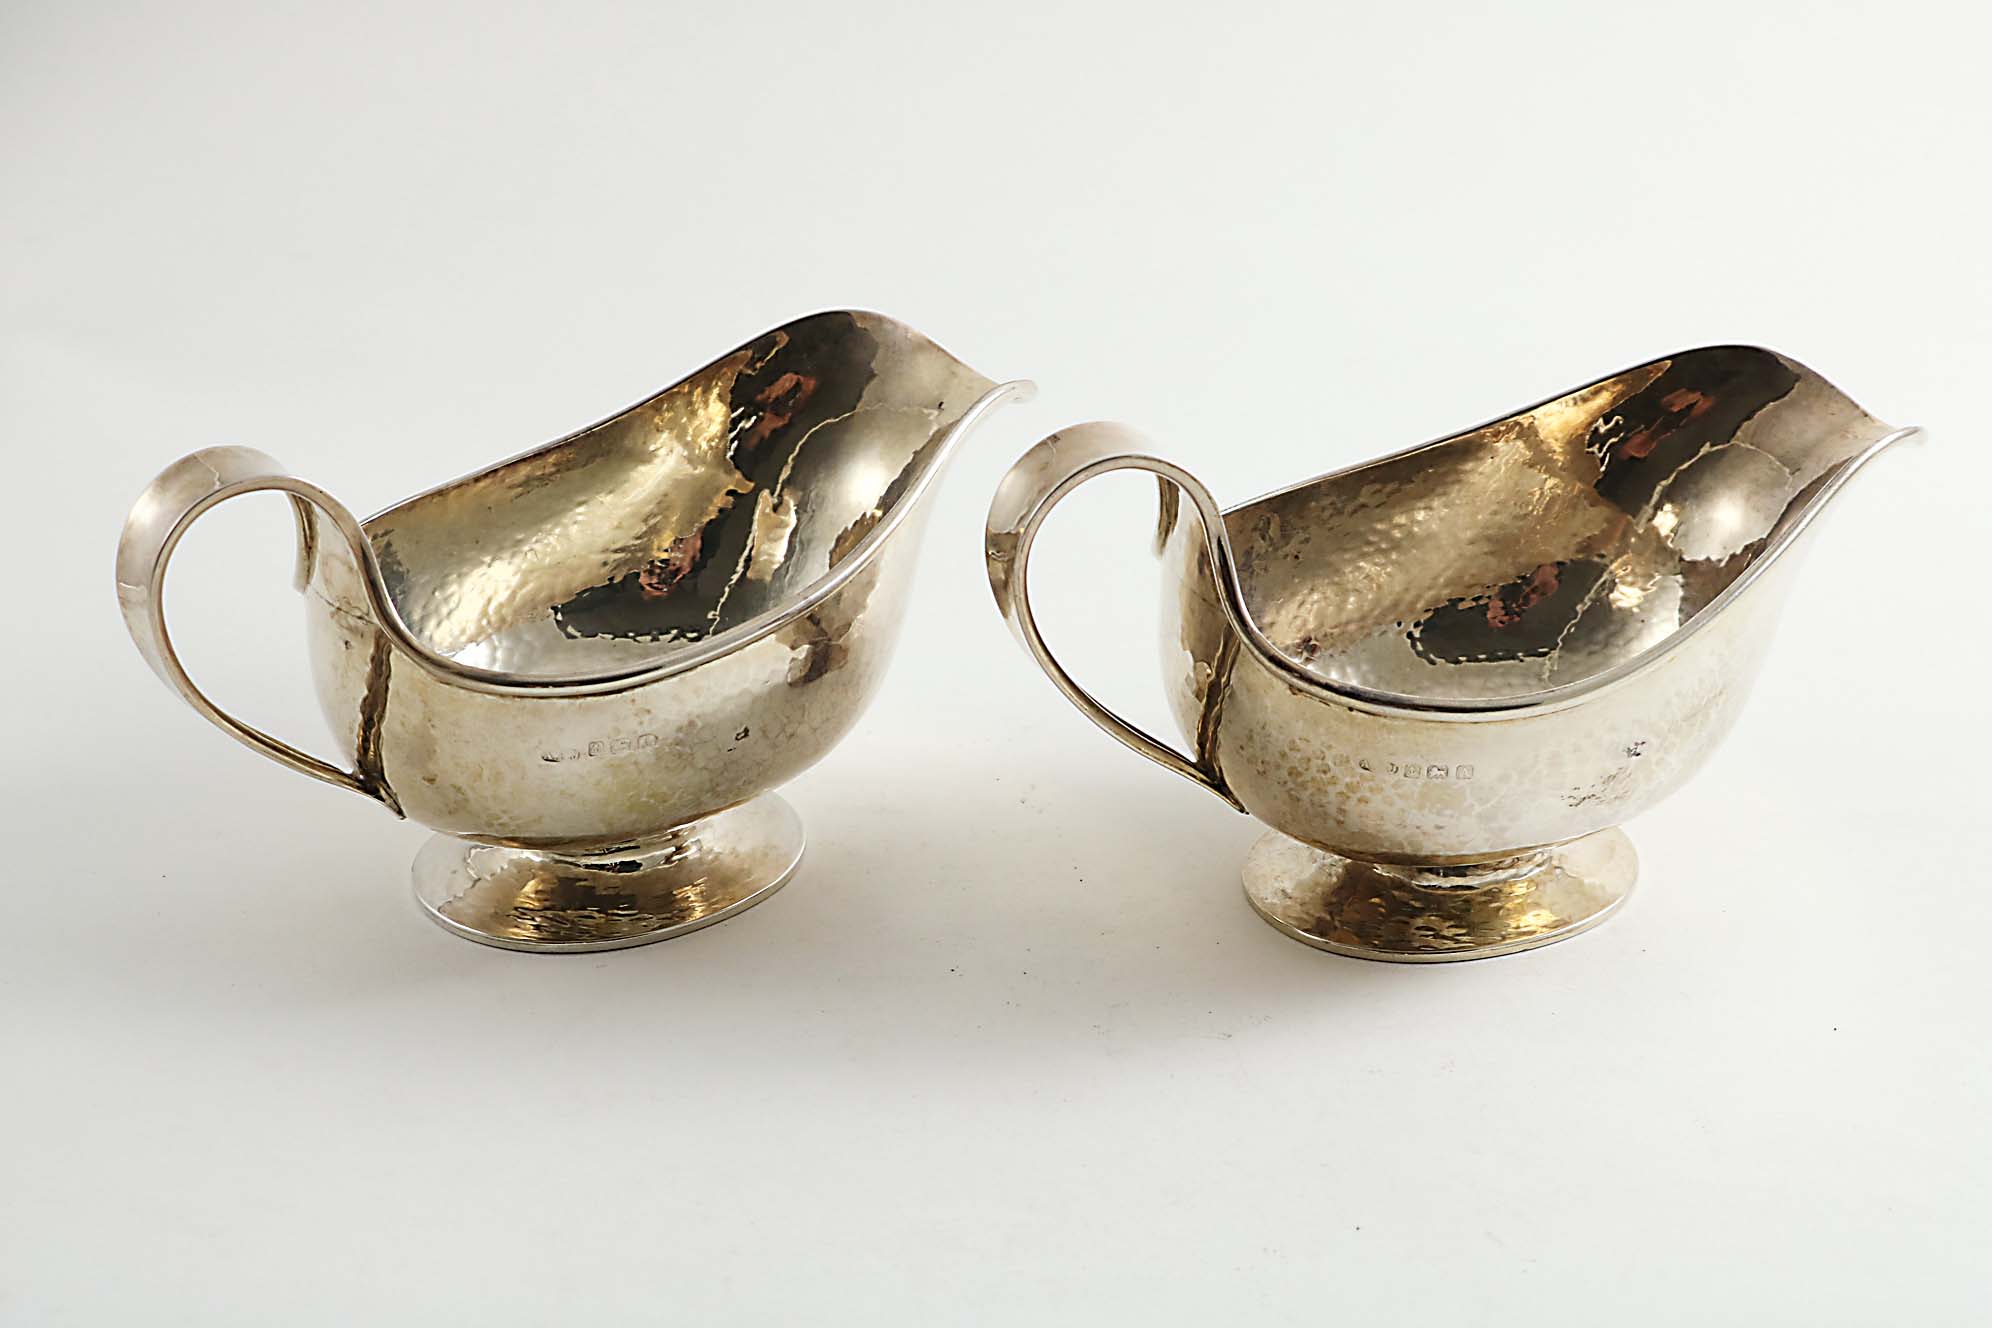 A PAIR OF EARLY 20TH CENTURY SAUCE BOATS with a hammered finish, loop handles and spreading oval